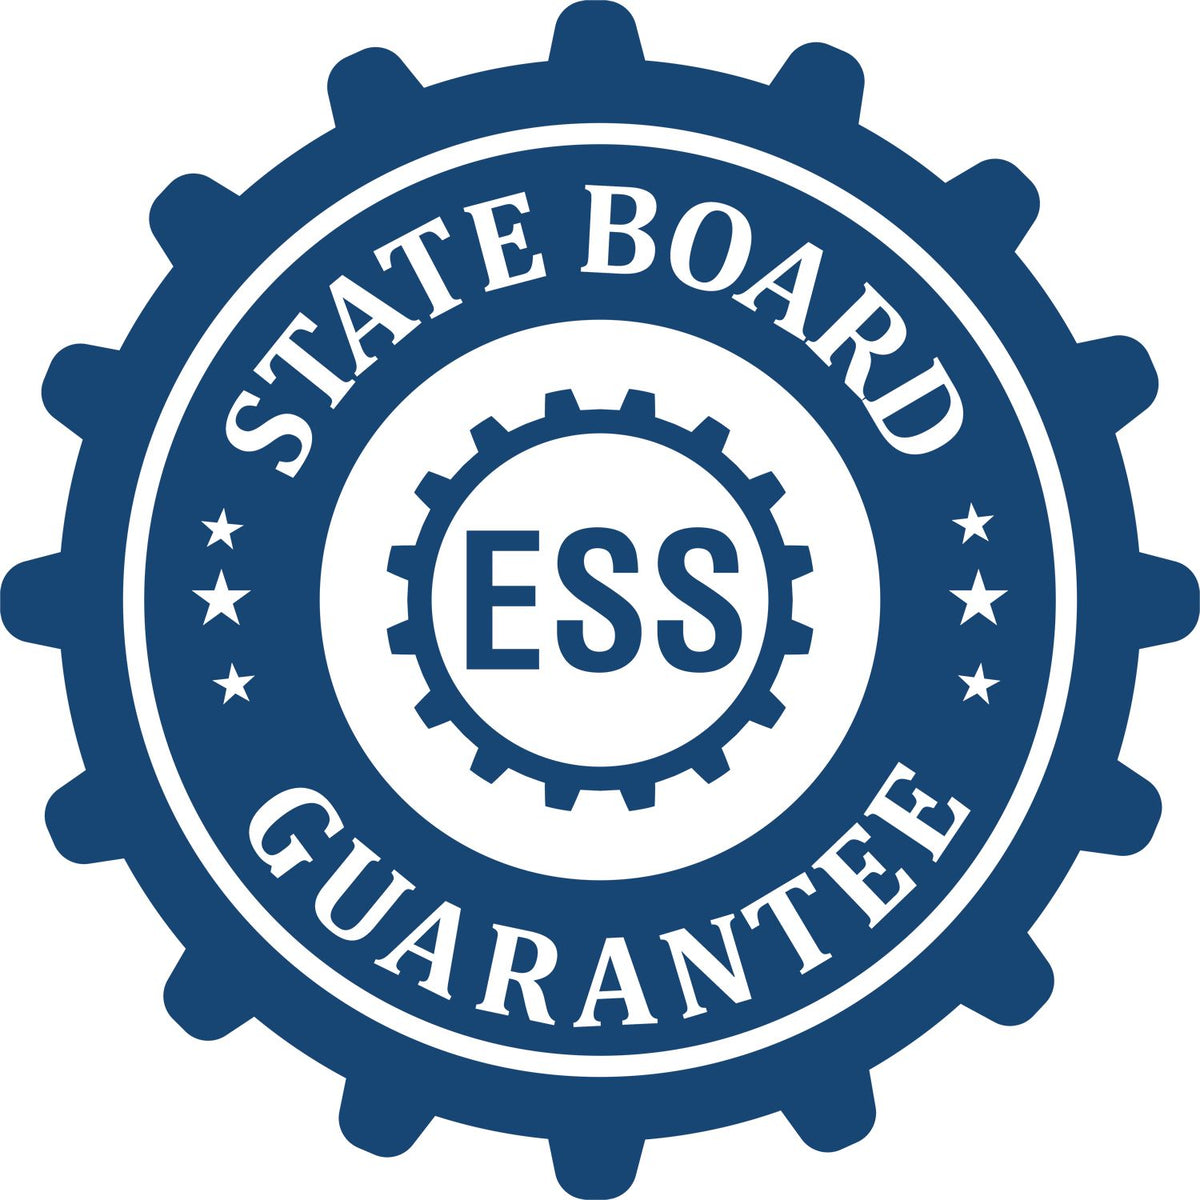 An emblem in a gear shape illustrating a state board guarantee for the Heavy-Duty New Mexico Rectangular Notary Stamp product.